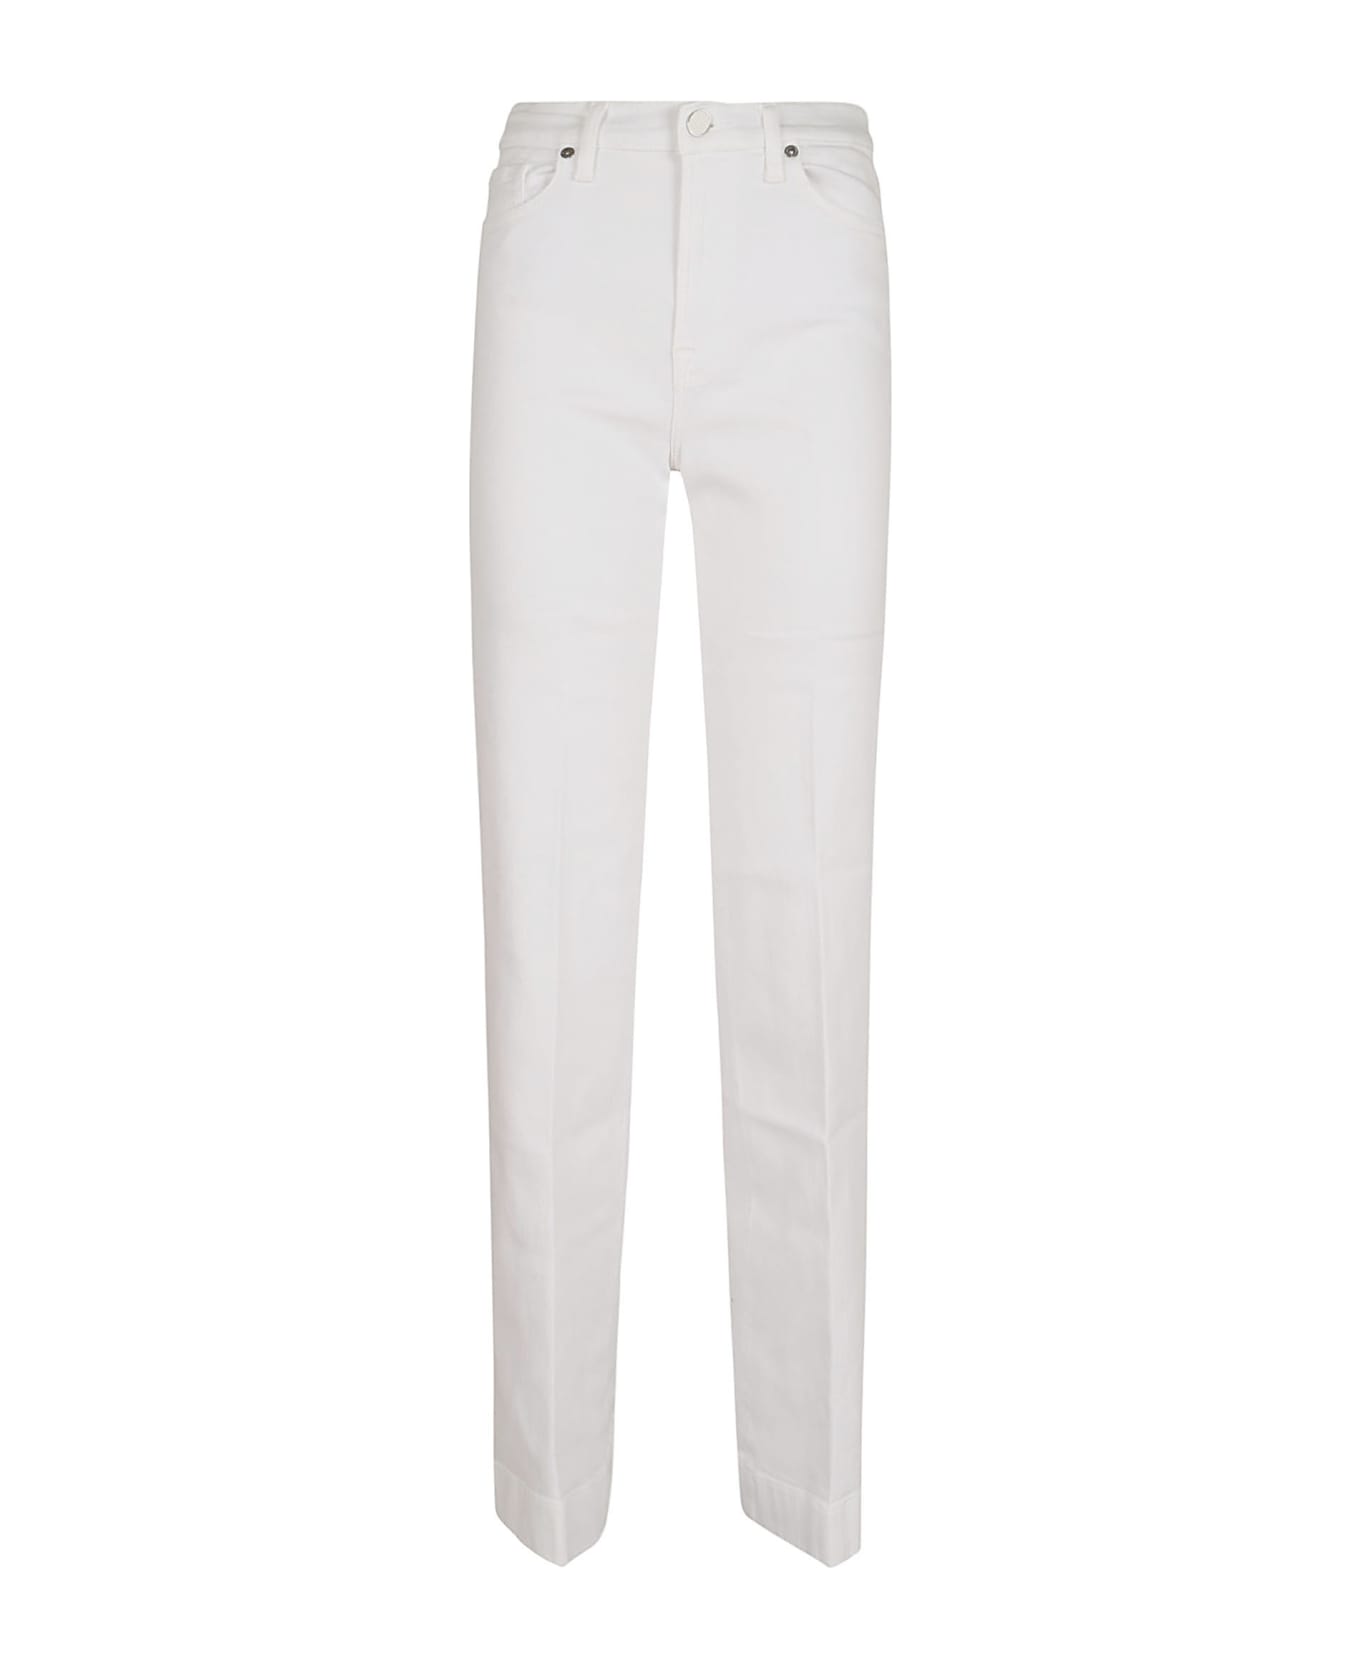 7 For All Mankind Modern Dojo Luxvinsol - White ボトムス